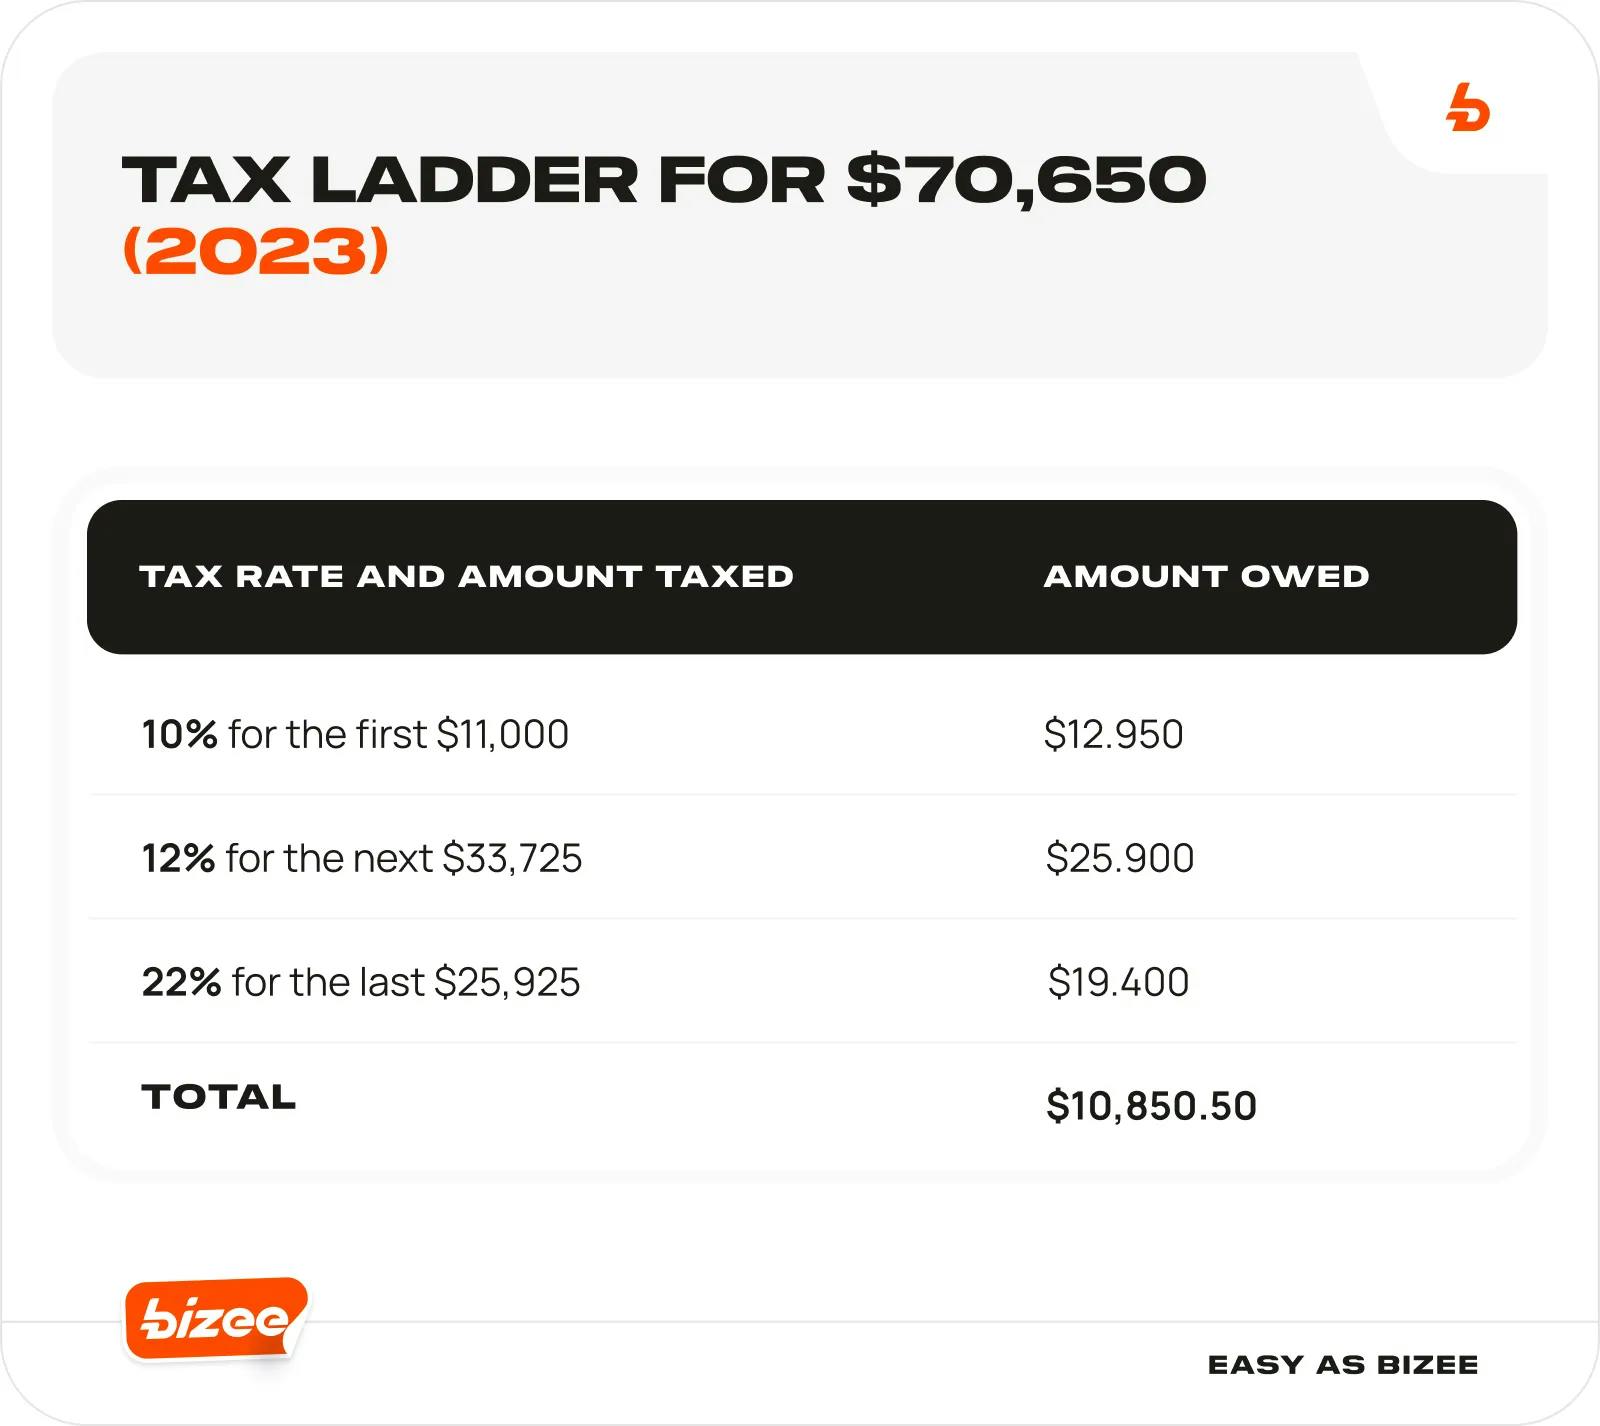 Tax Ladder for $70,650 (2023)